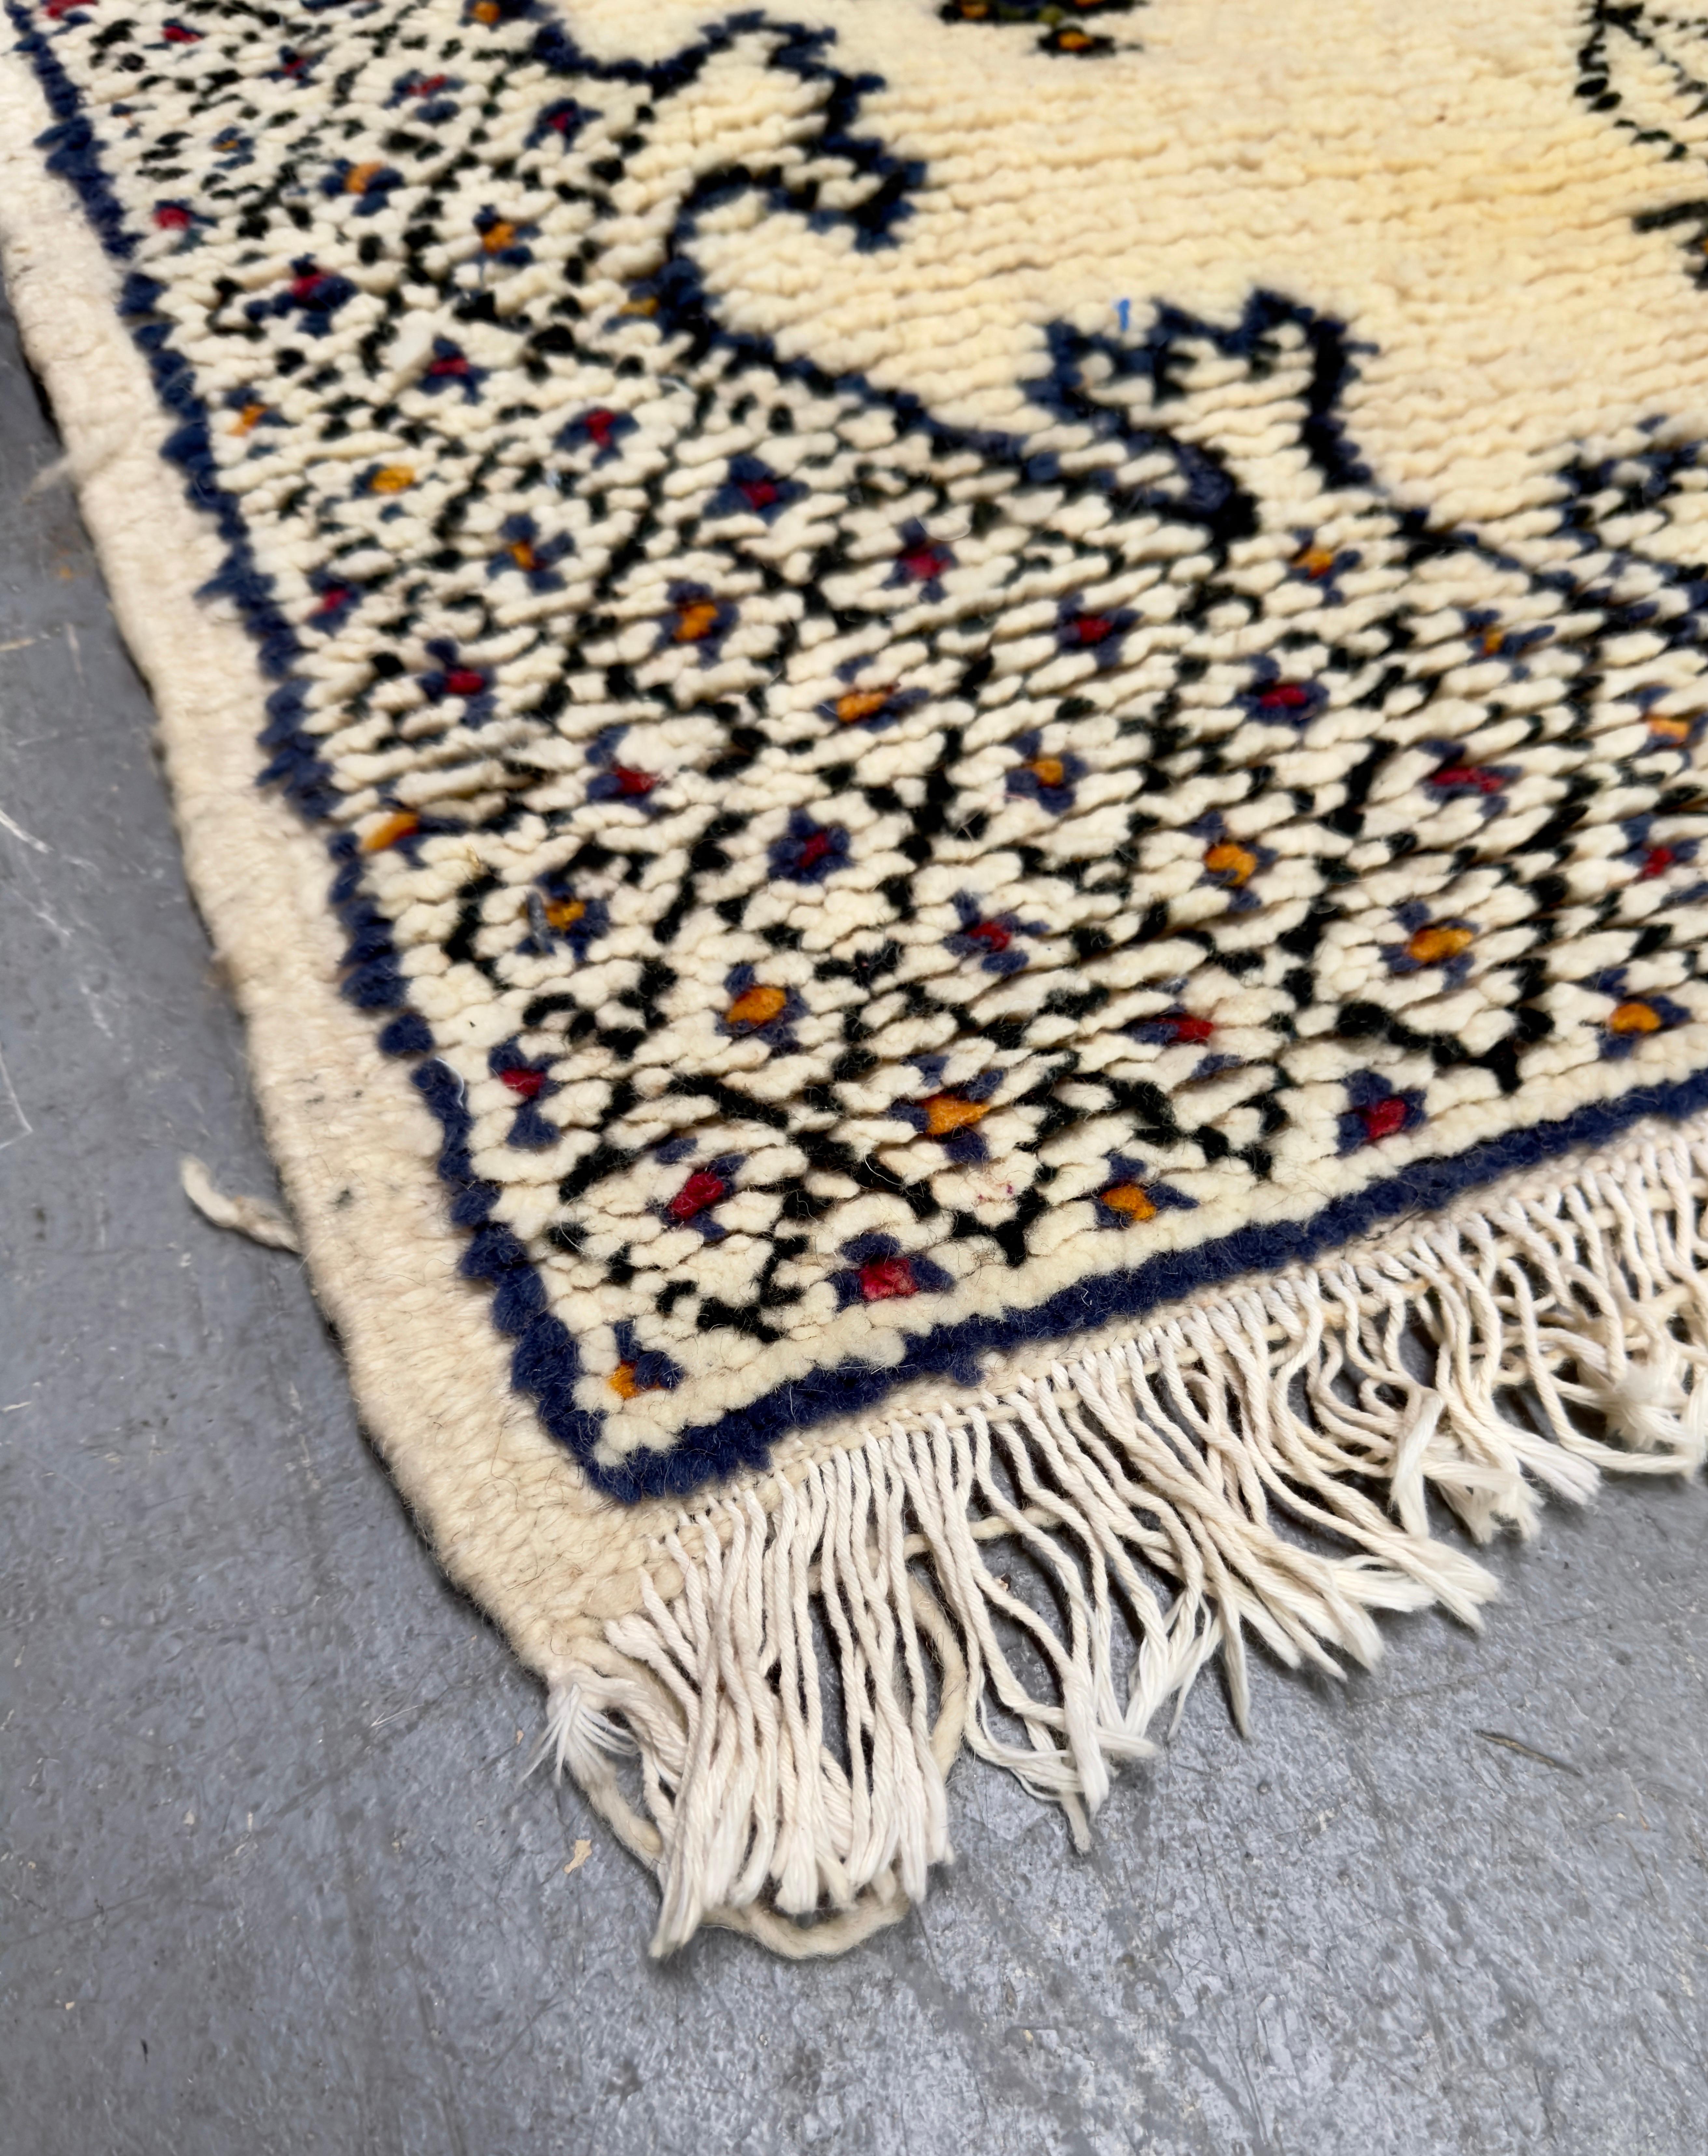 Boho Chic  Moroccan Small White & Black Wool Hand-Woven Rug or Carpet  In Good Condition For Sale In Plainview, NY